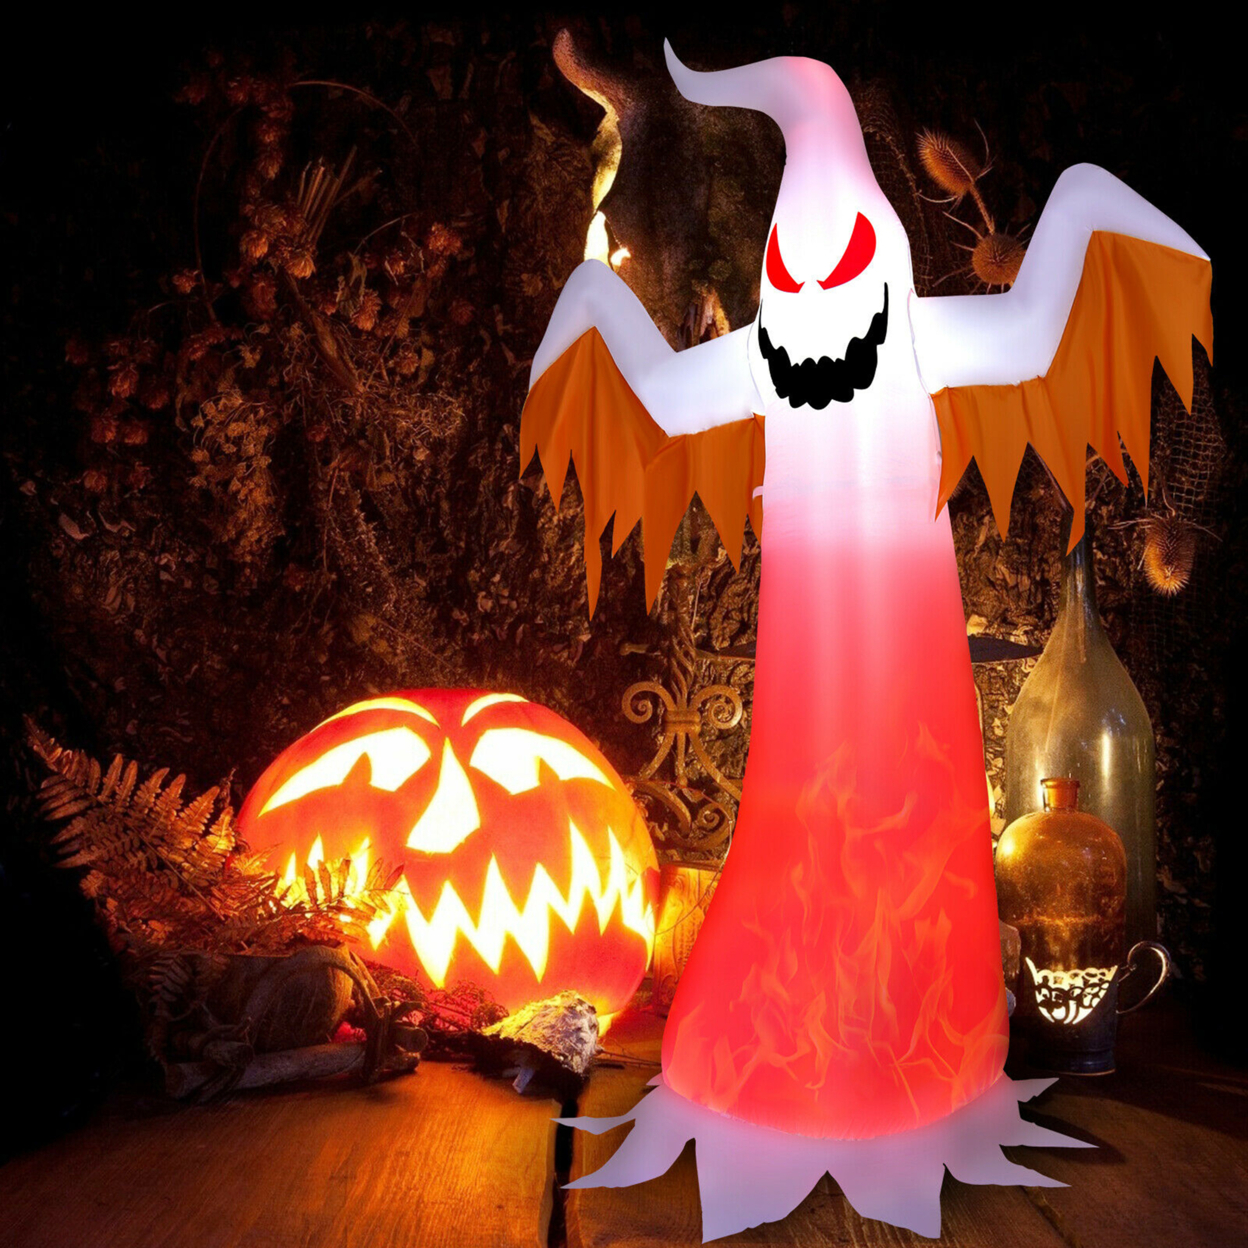 8ft Inflatable Halloween Ghost Blow Up Decoration W/ Built-in Flame Light